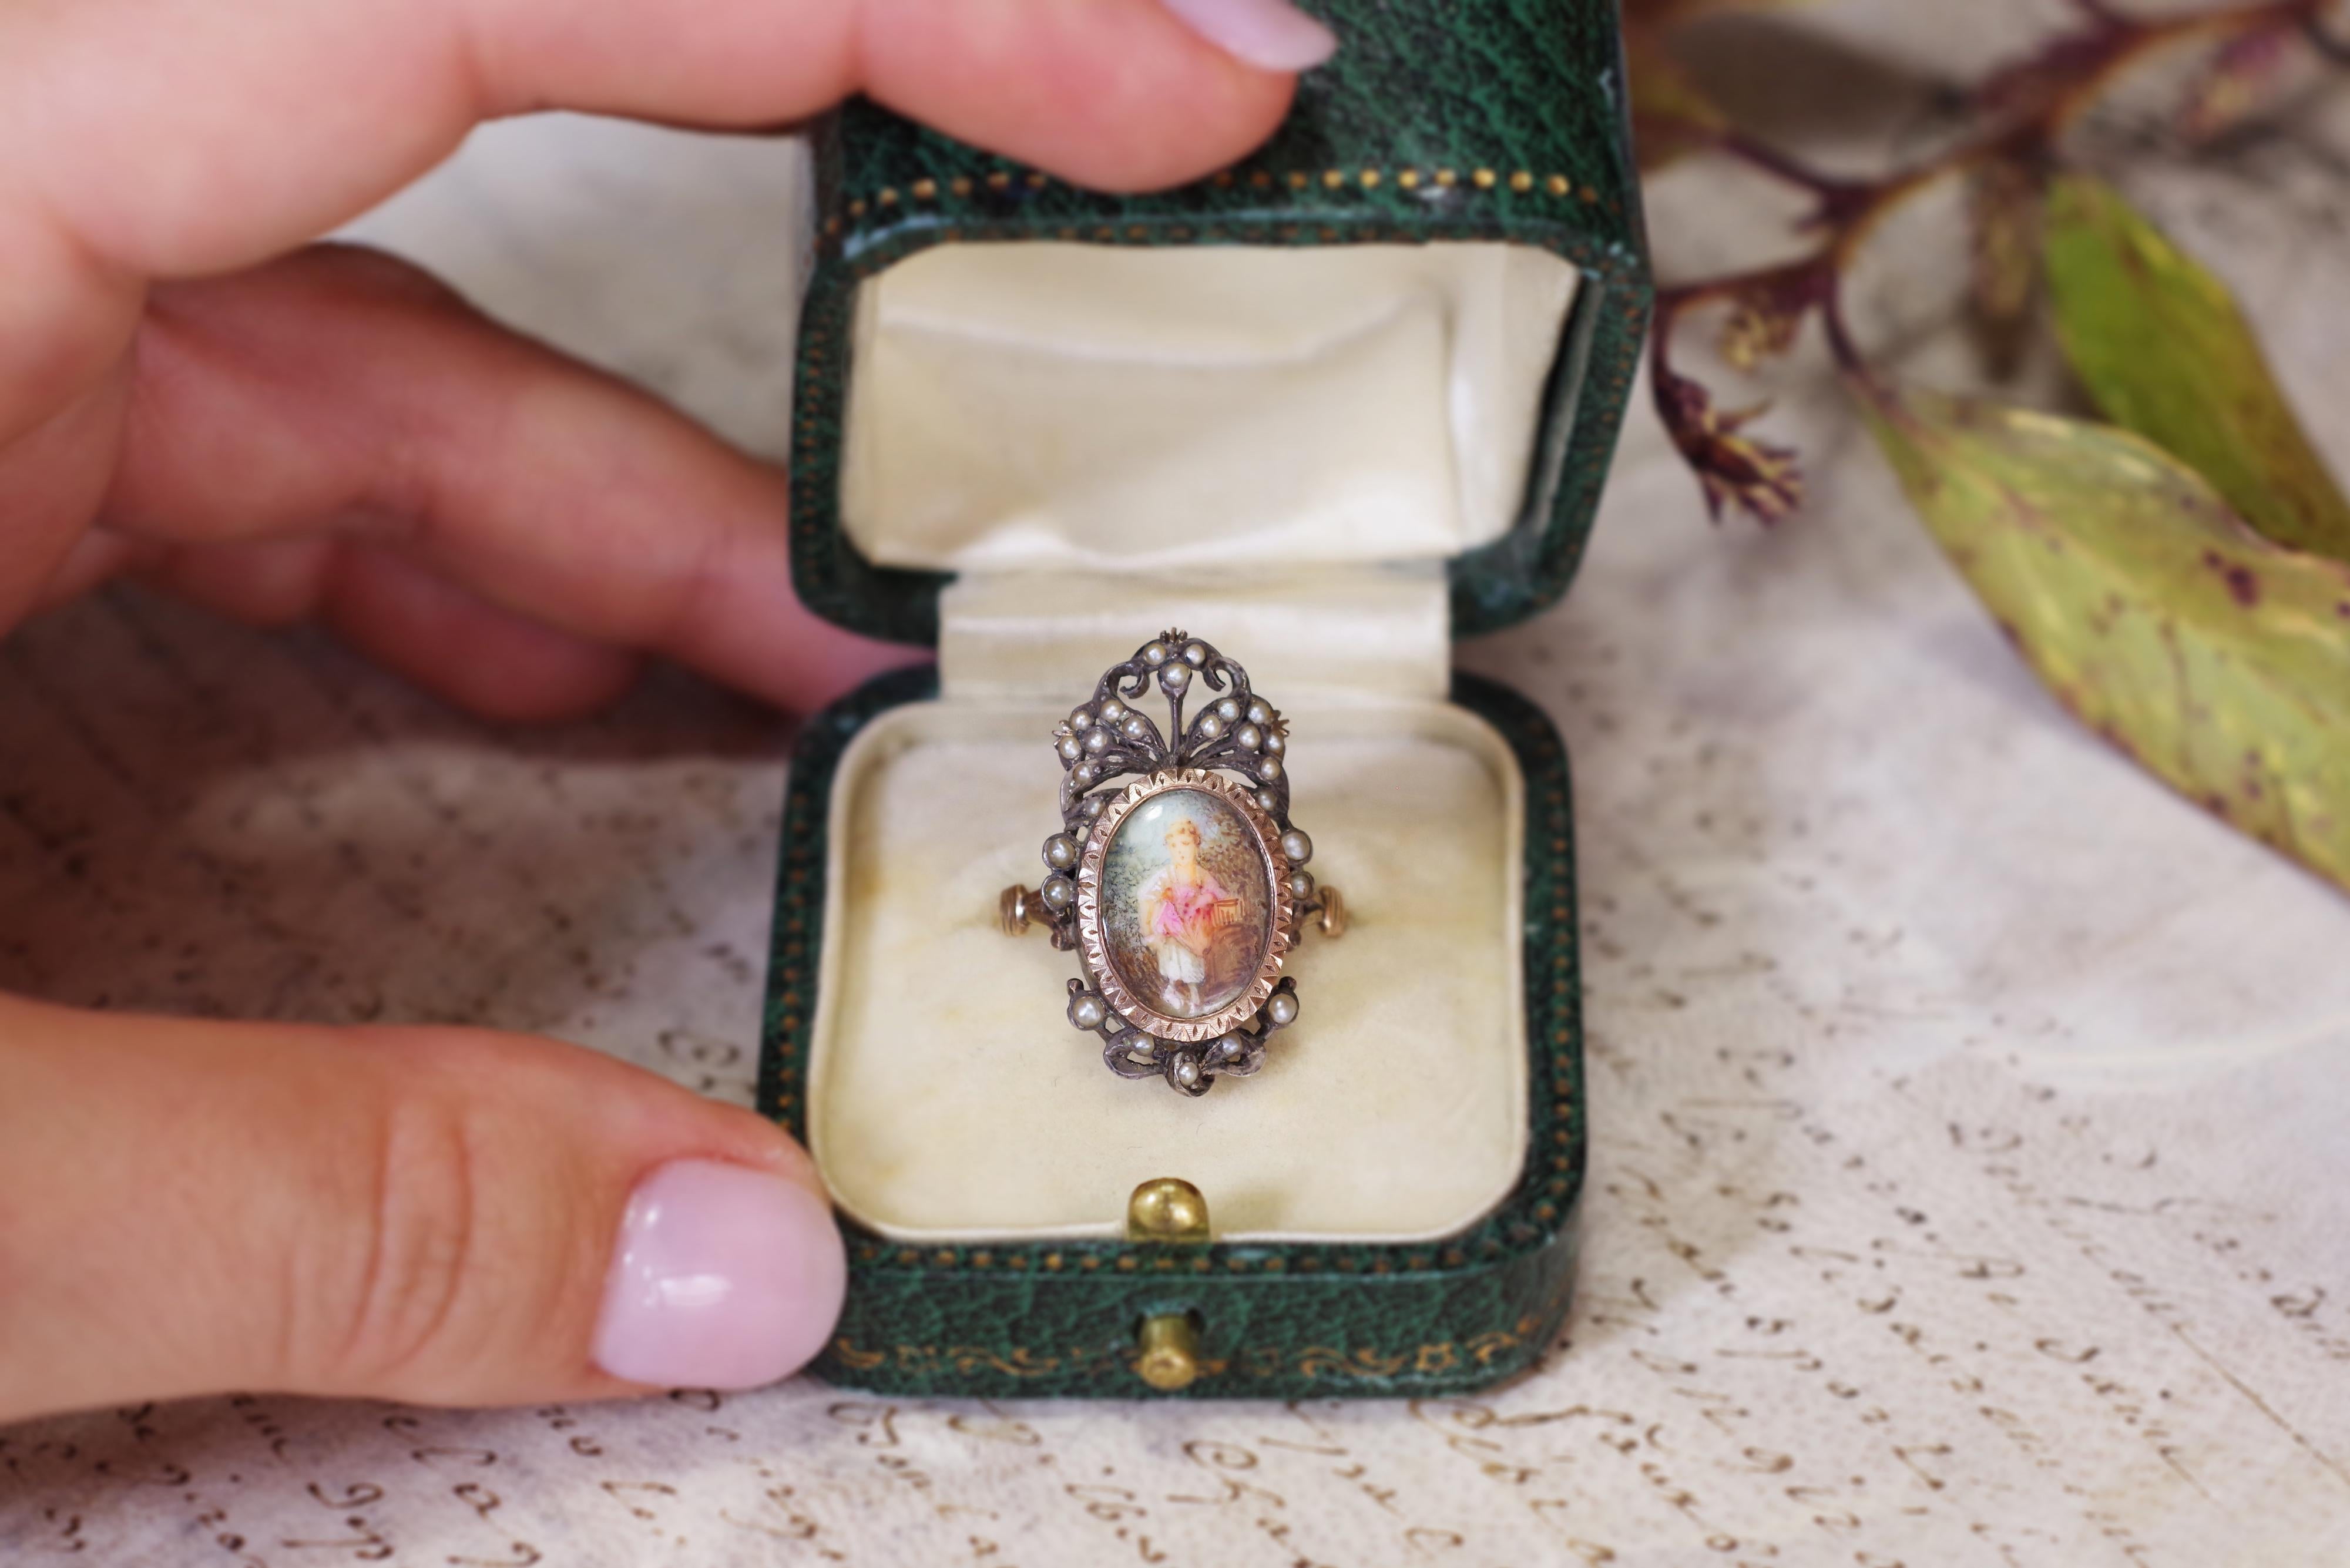 Georgian Maiden Portrait Ring in Gold and Silver, 18th Century Ring For Sale 2